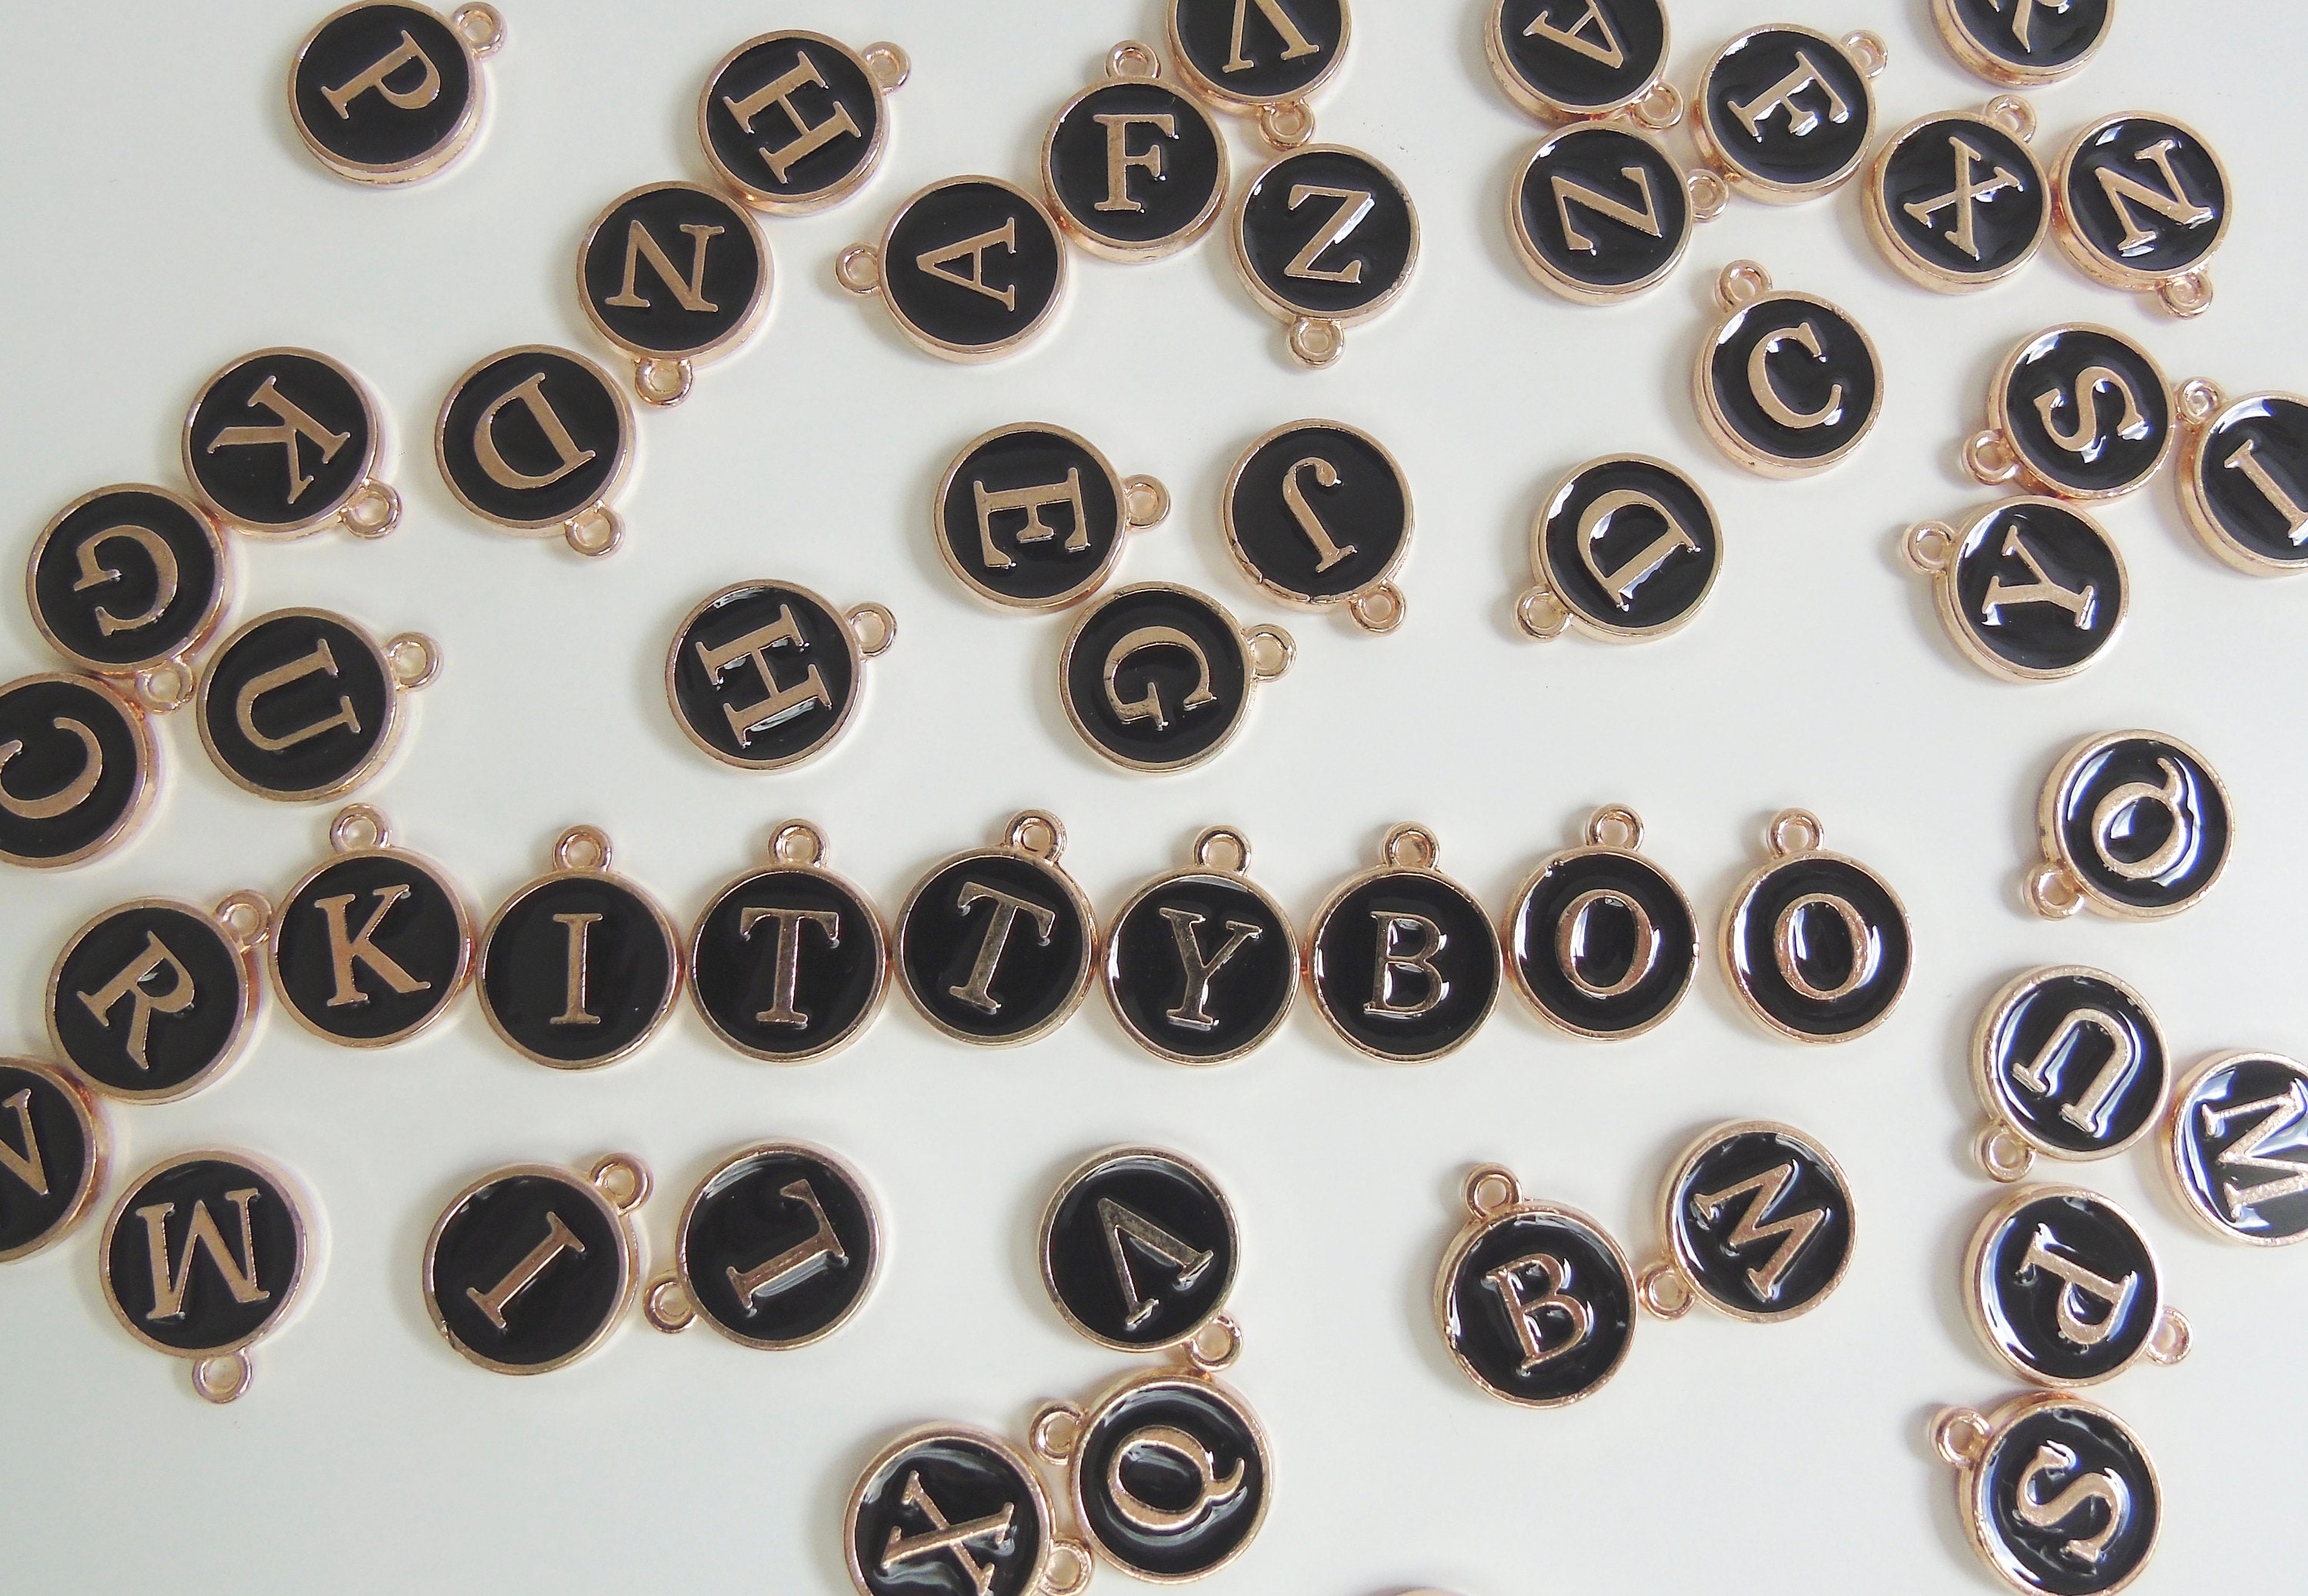 Gold Alphabet Letter Charms, 16mm, Complete A-Z Set, Name Initial Pendants,  Make Your Own Necklace, Jewelry Making Add On, Gift for Her UK 